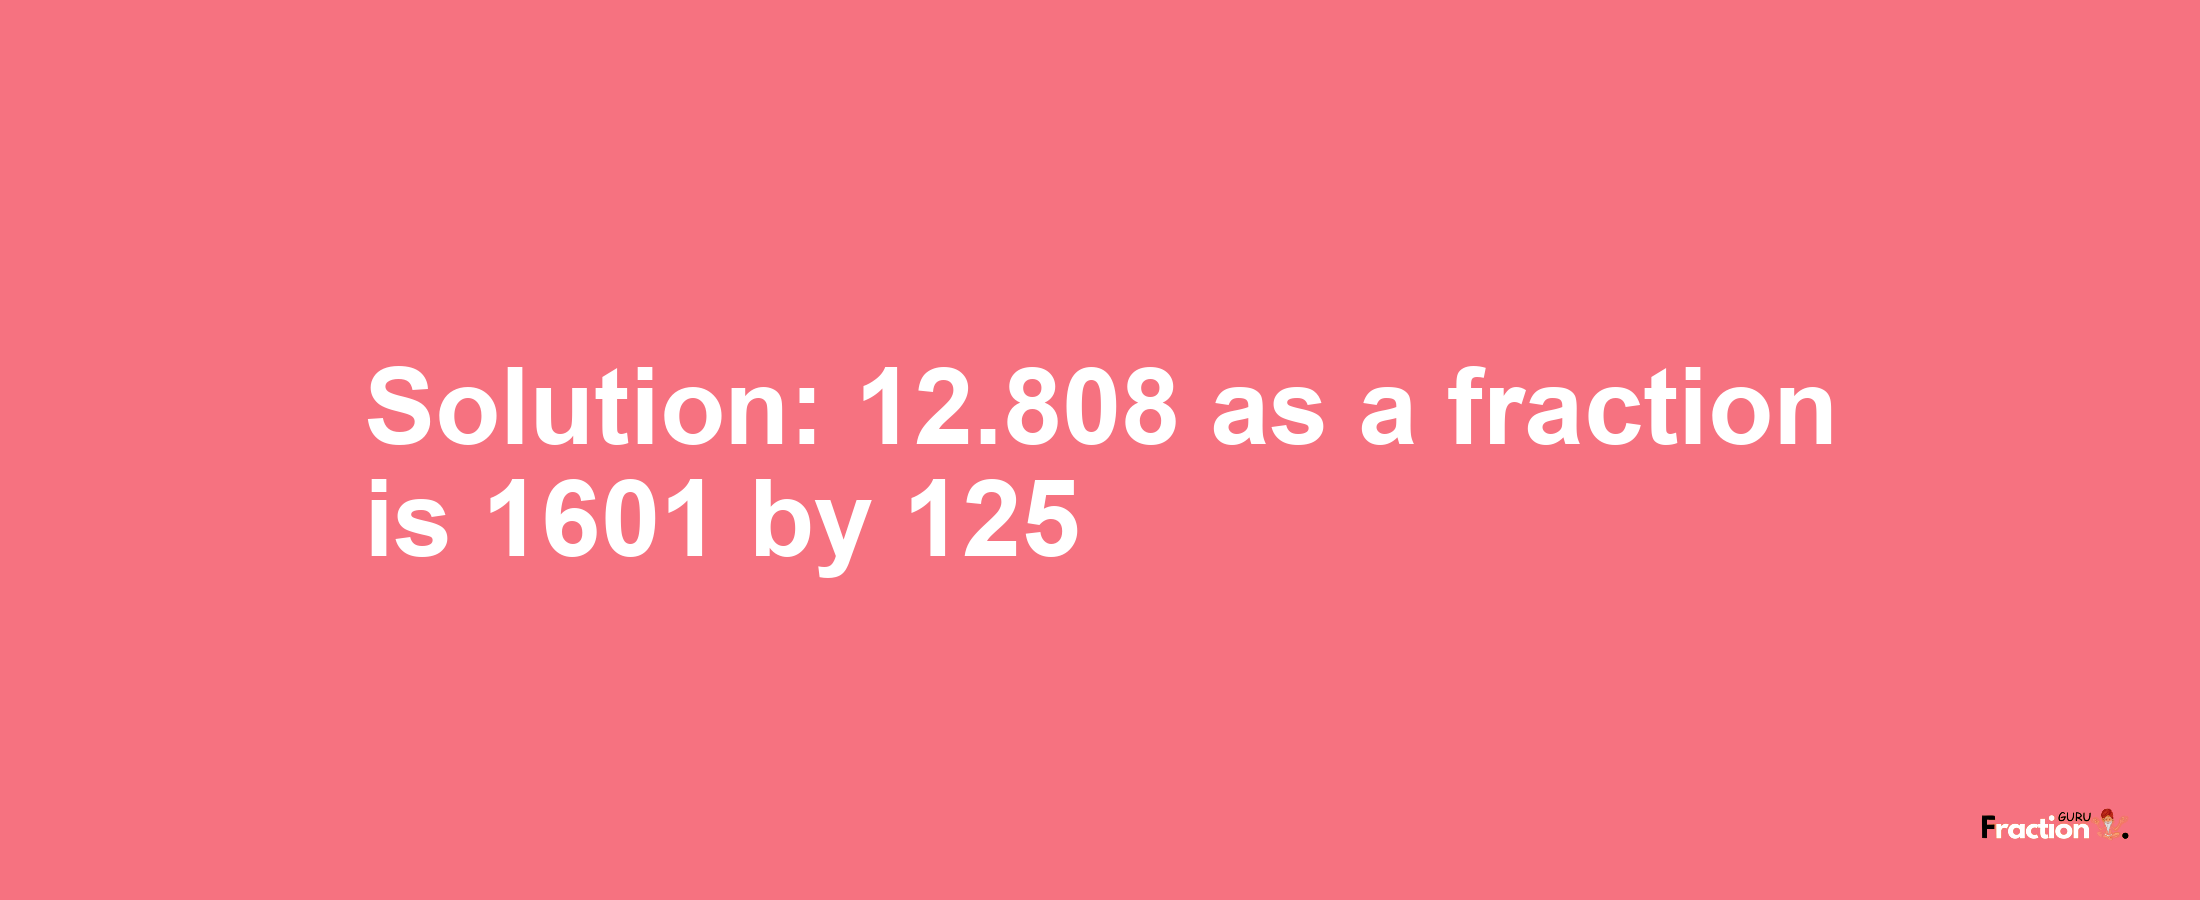 Solution:12.808 as a fraction is 1601/125